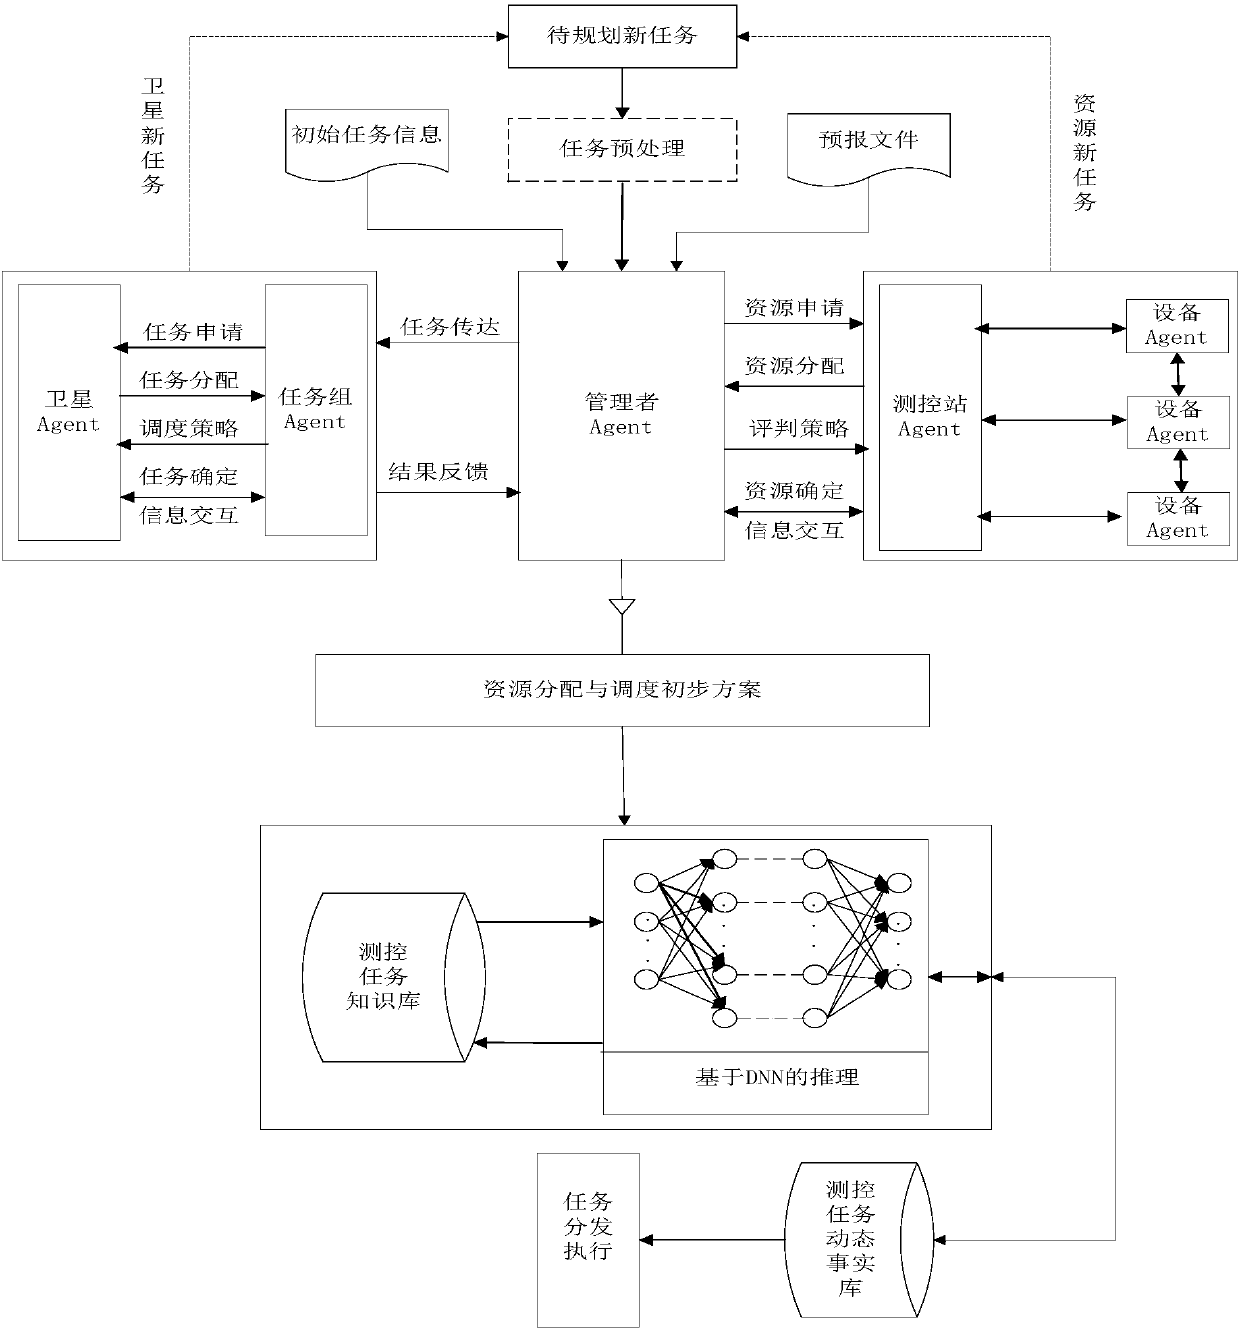 Measurement and control resource scheduling distribution method based on Multi-Agent and DNN